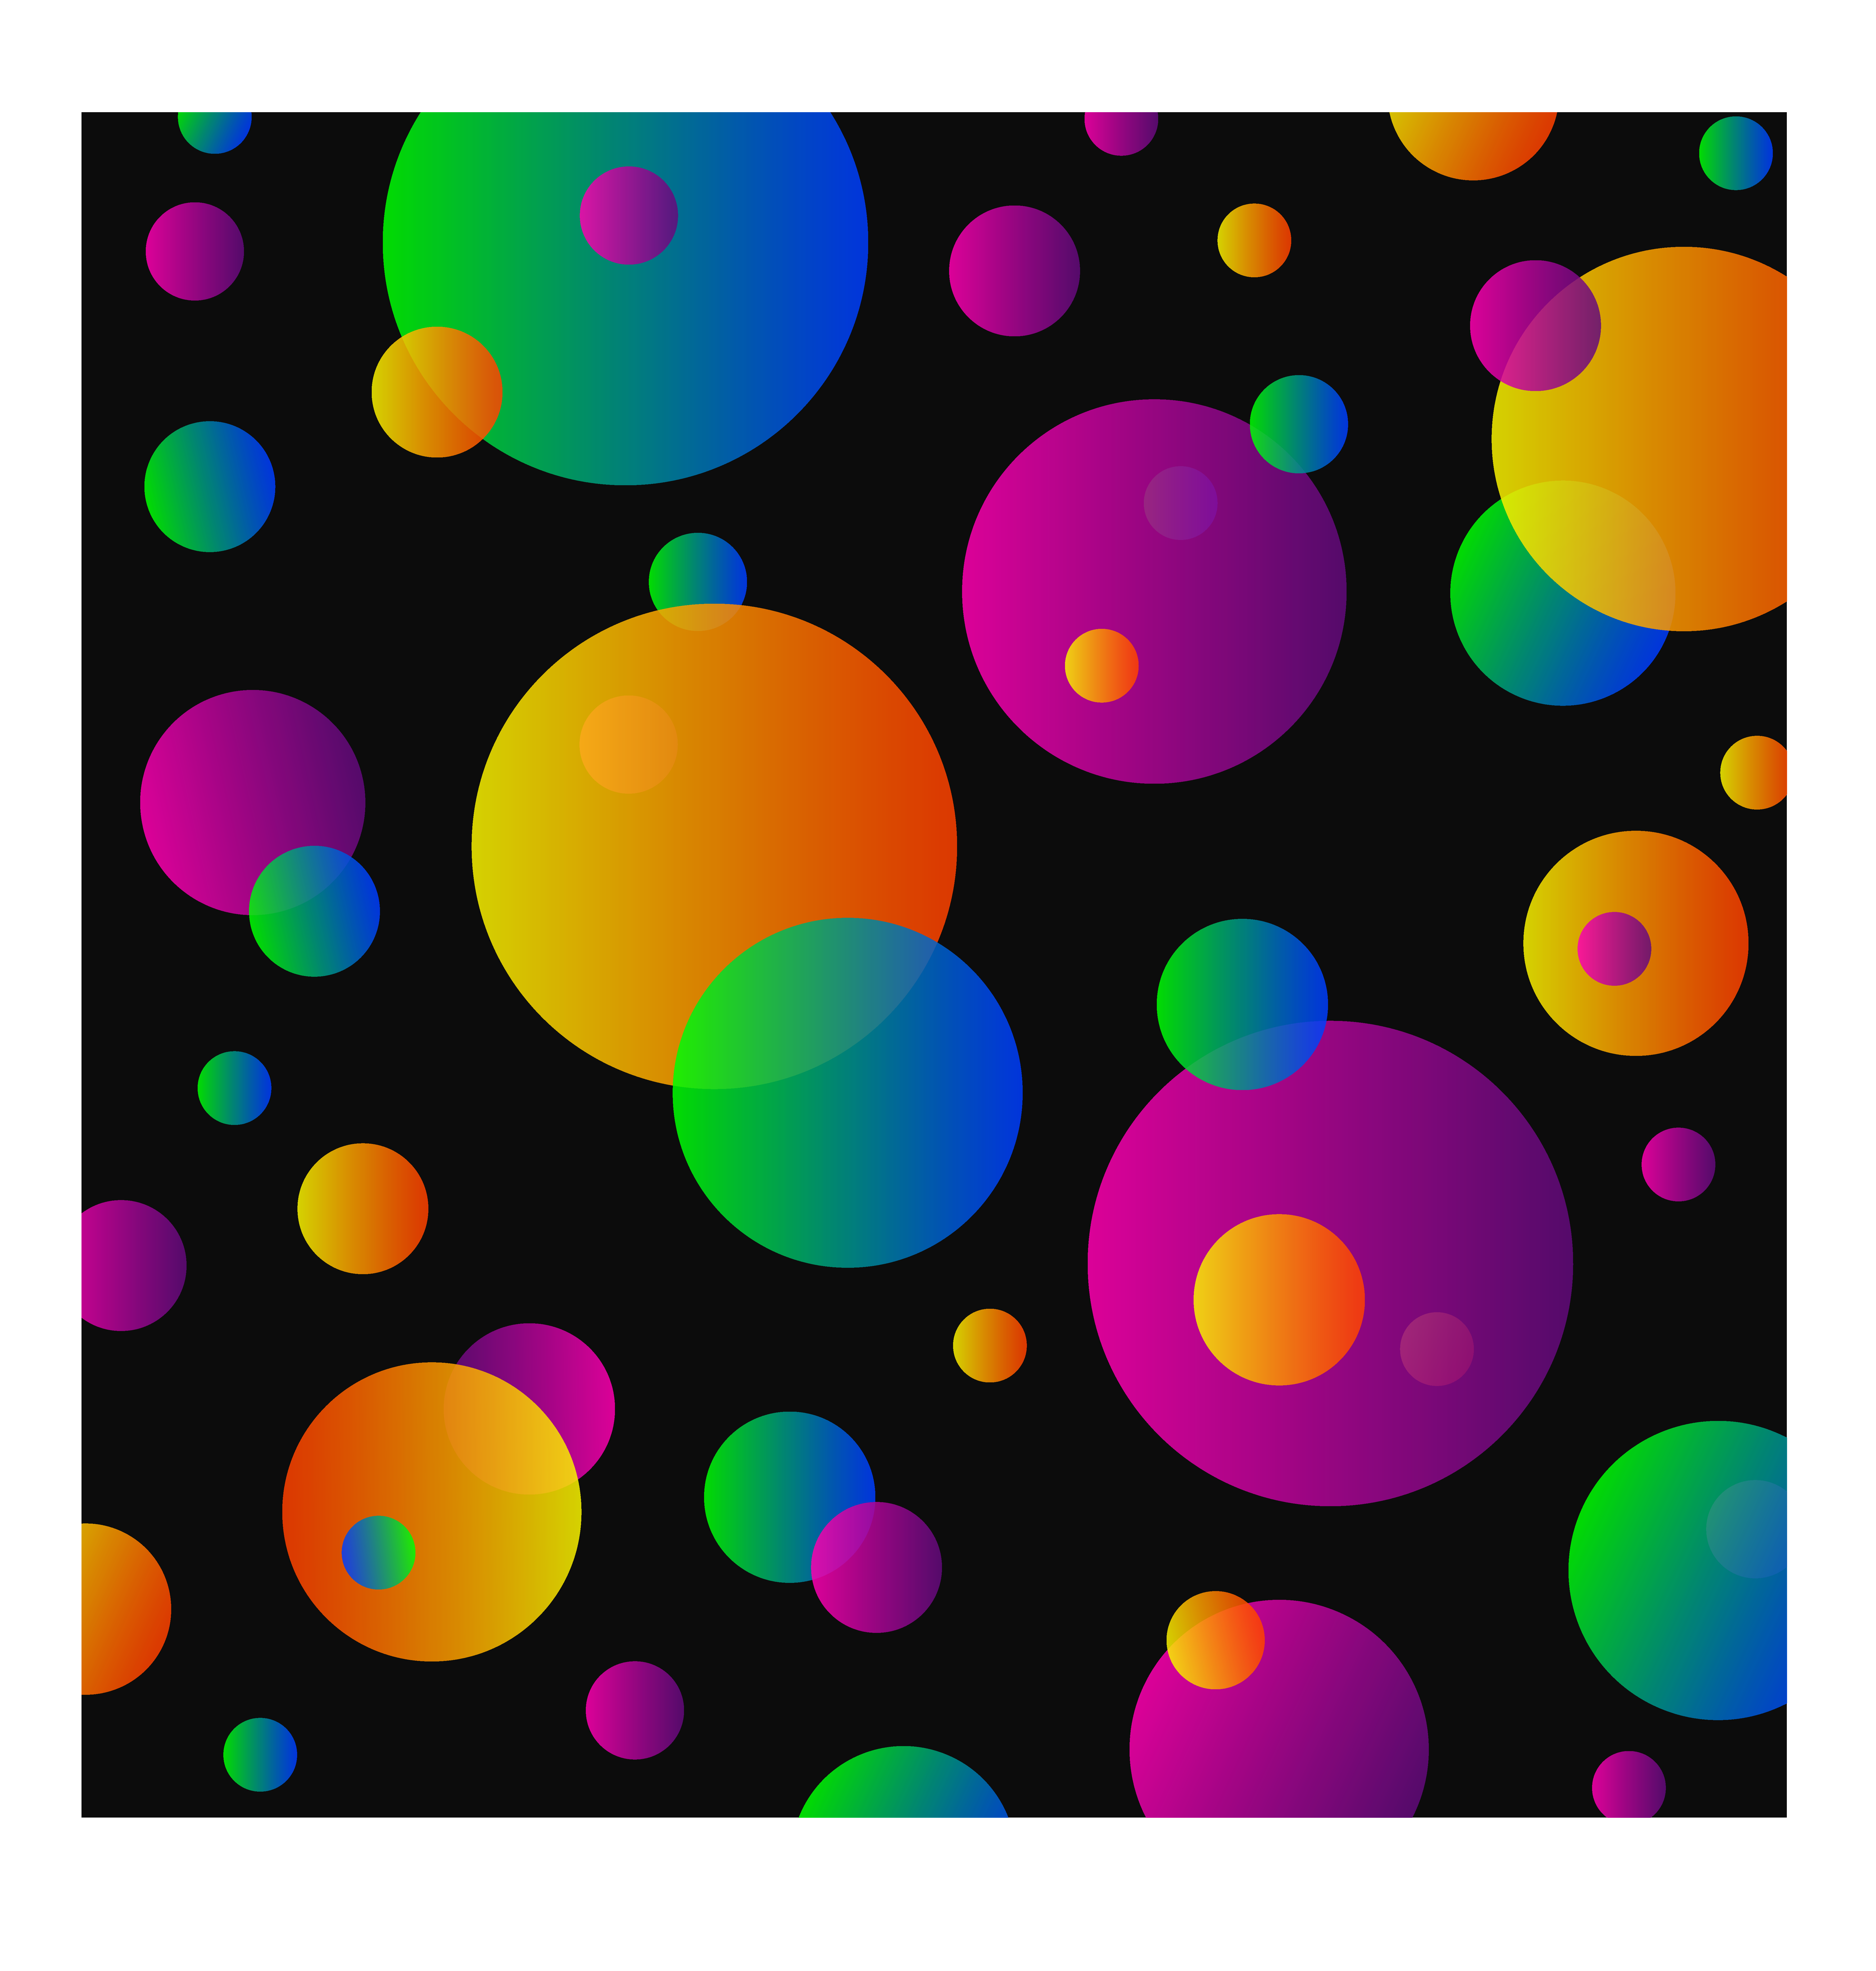 Colorful circles pattern on. Dot clipart colour full